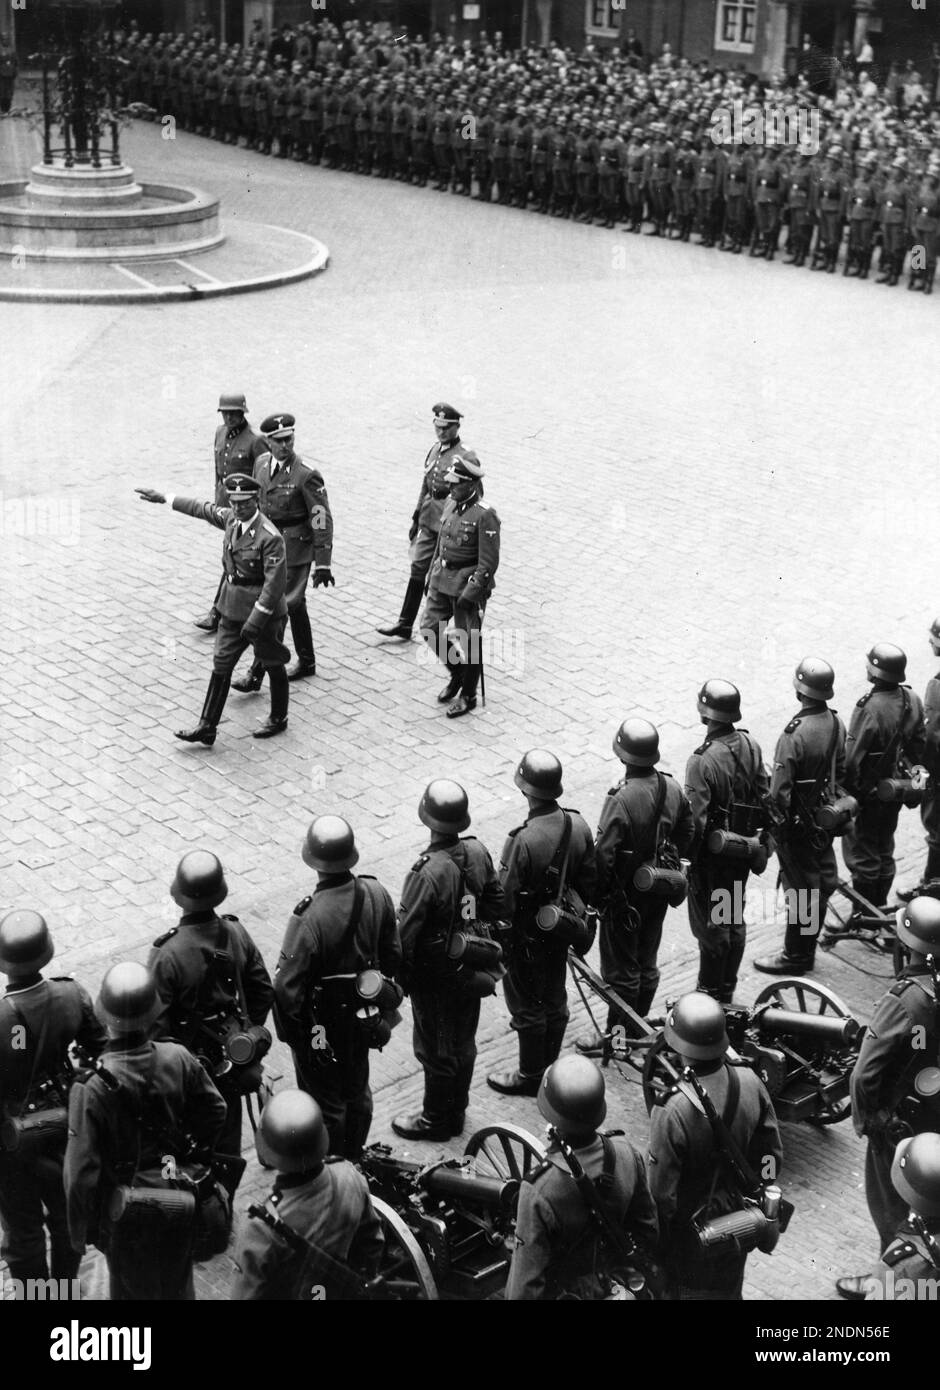 Reich commissioner Seyss Inquart inspects the enlisted Totenkopf Battalion at the Binnenhof. Its official name was Totenkopf Standarte, part of the Waffen SS. They were involved in the February strike in 1941. Text strip attached to photograph. Stock Photo